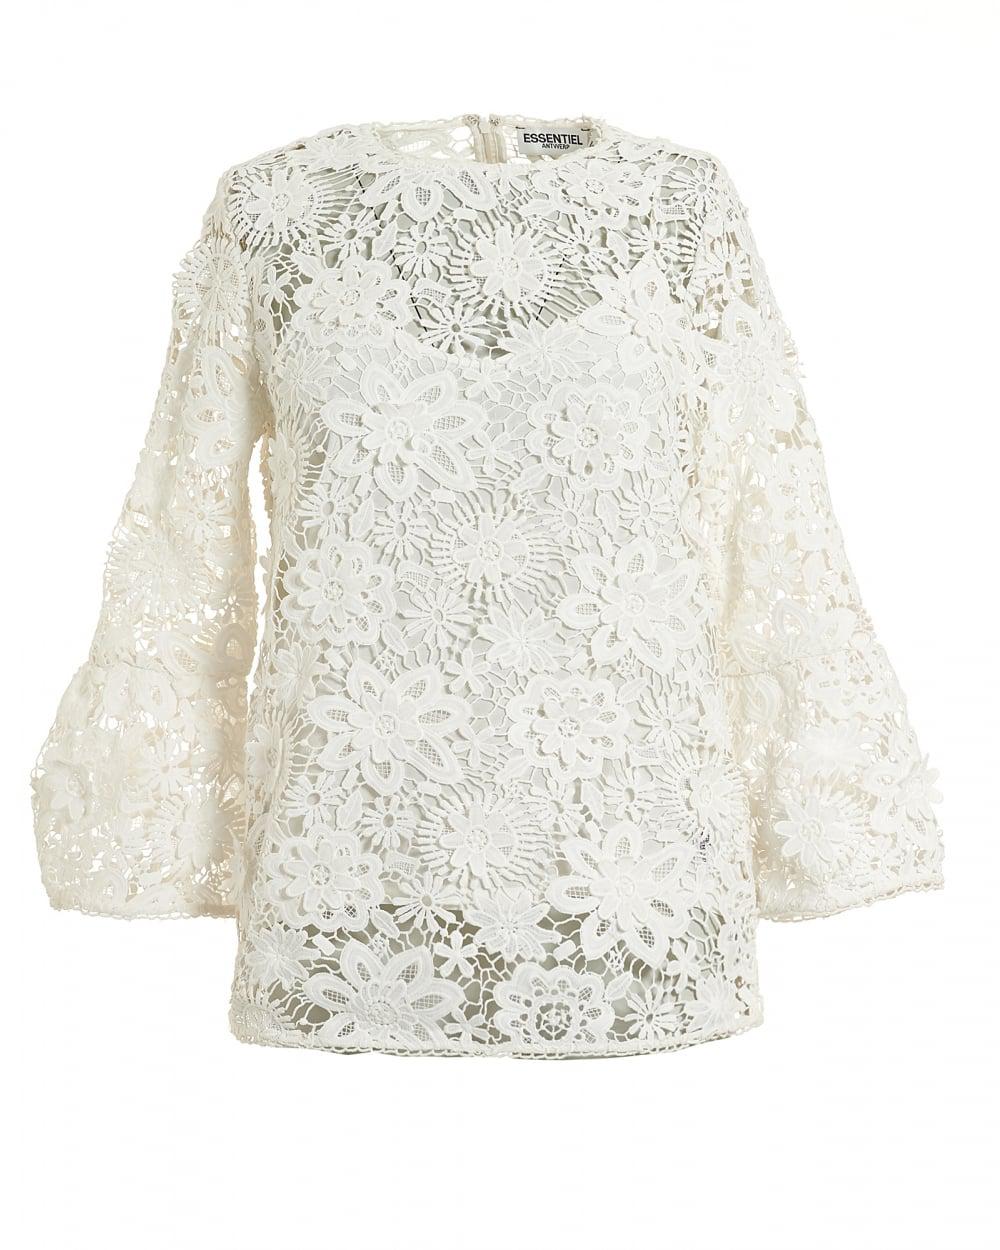 Lyst - Essentiel Antwerp Cream Pimono Large Ivory Floral Lace Top in White